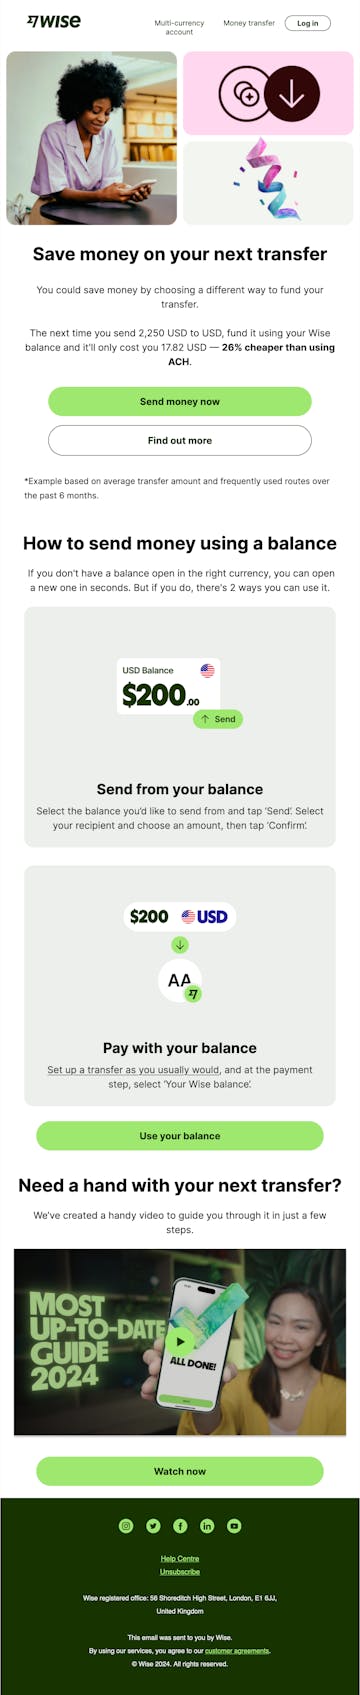 Wise (formerly TransferWise) Email Design Thumbnail Preview